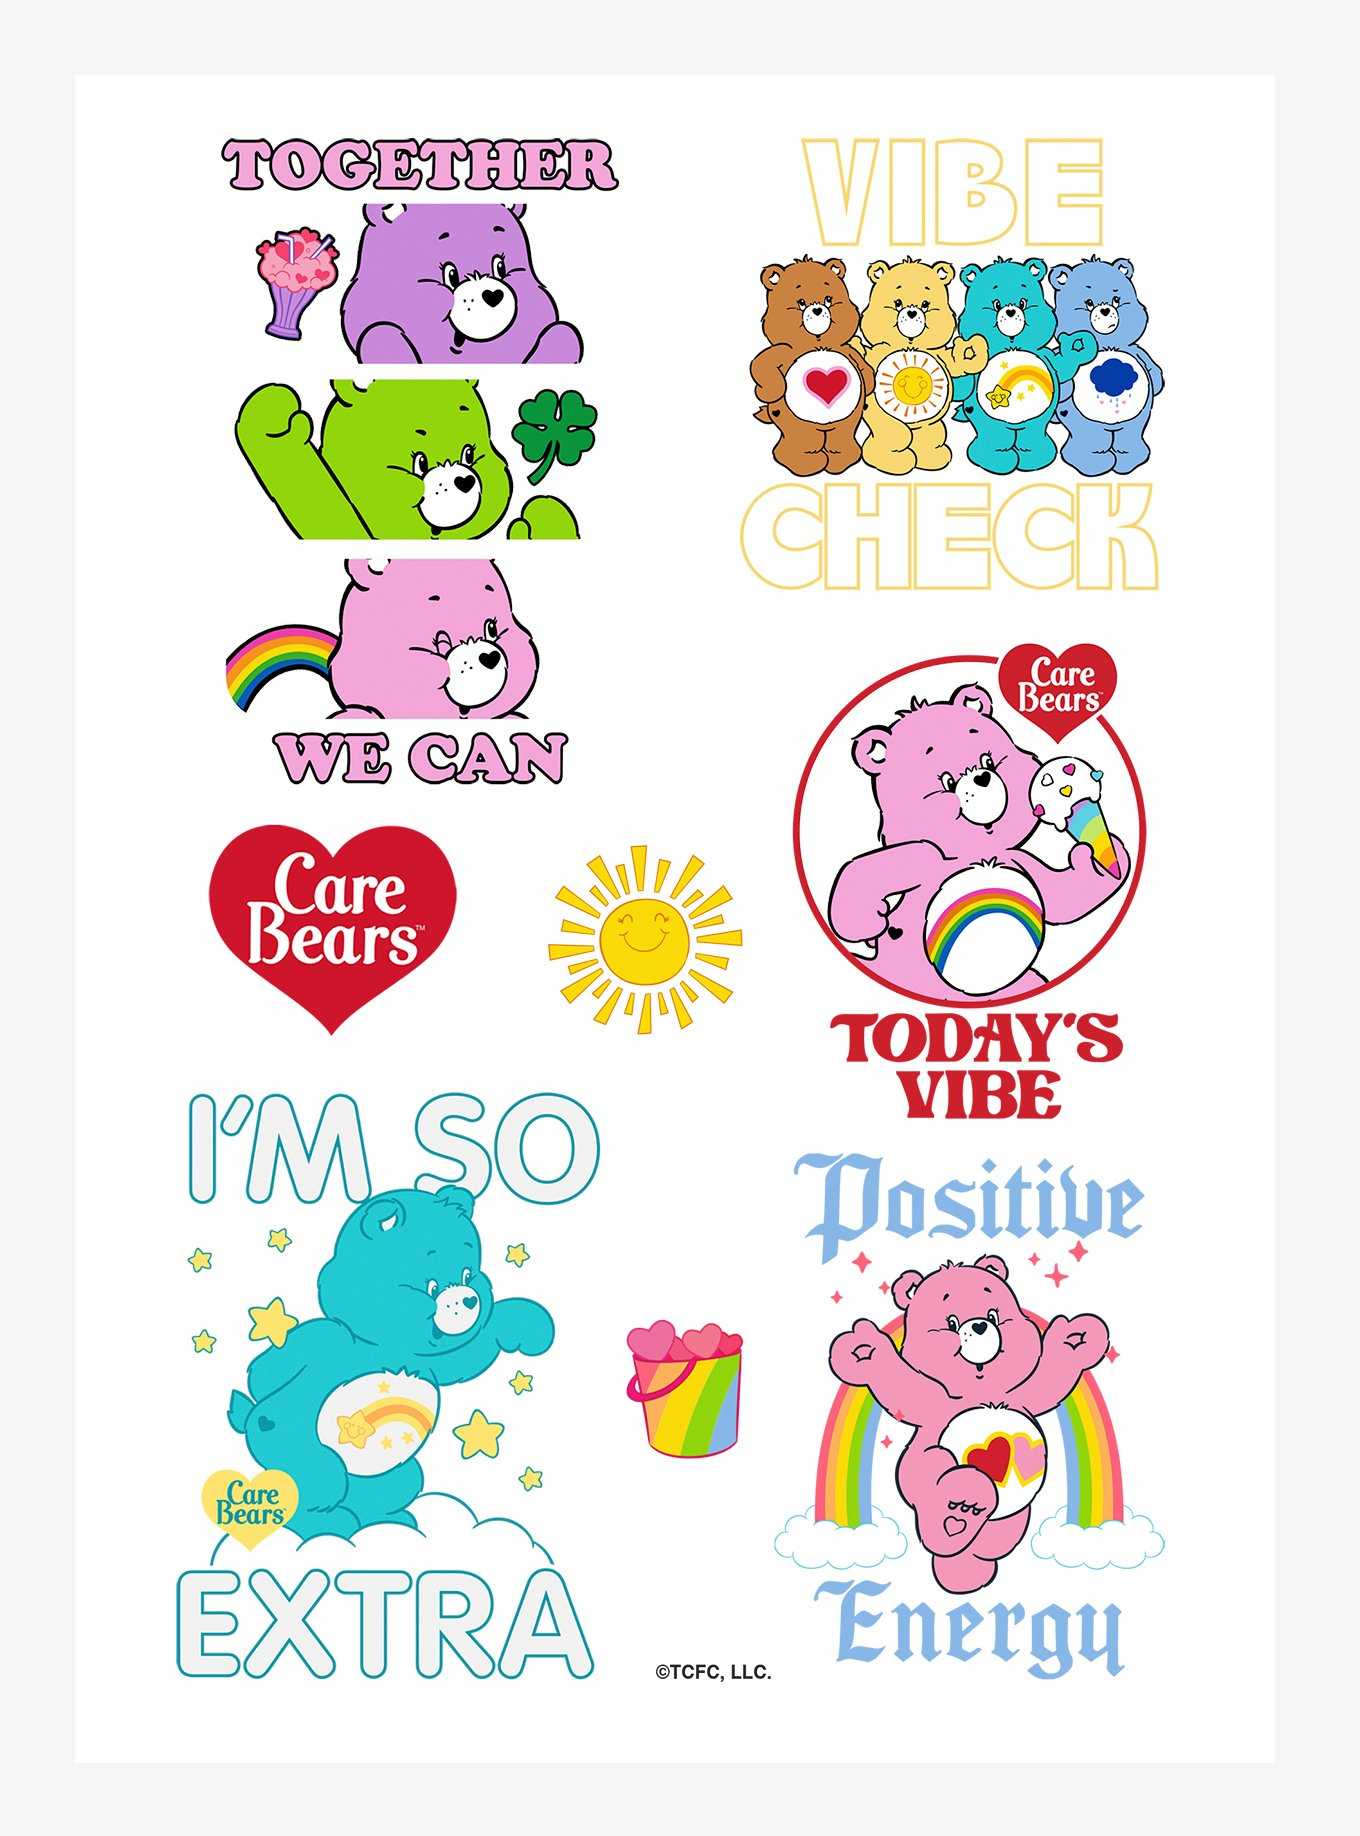 Care Bears Stickers, Single Package has 3 Sheets and 69 Stickers